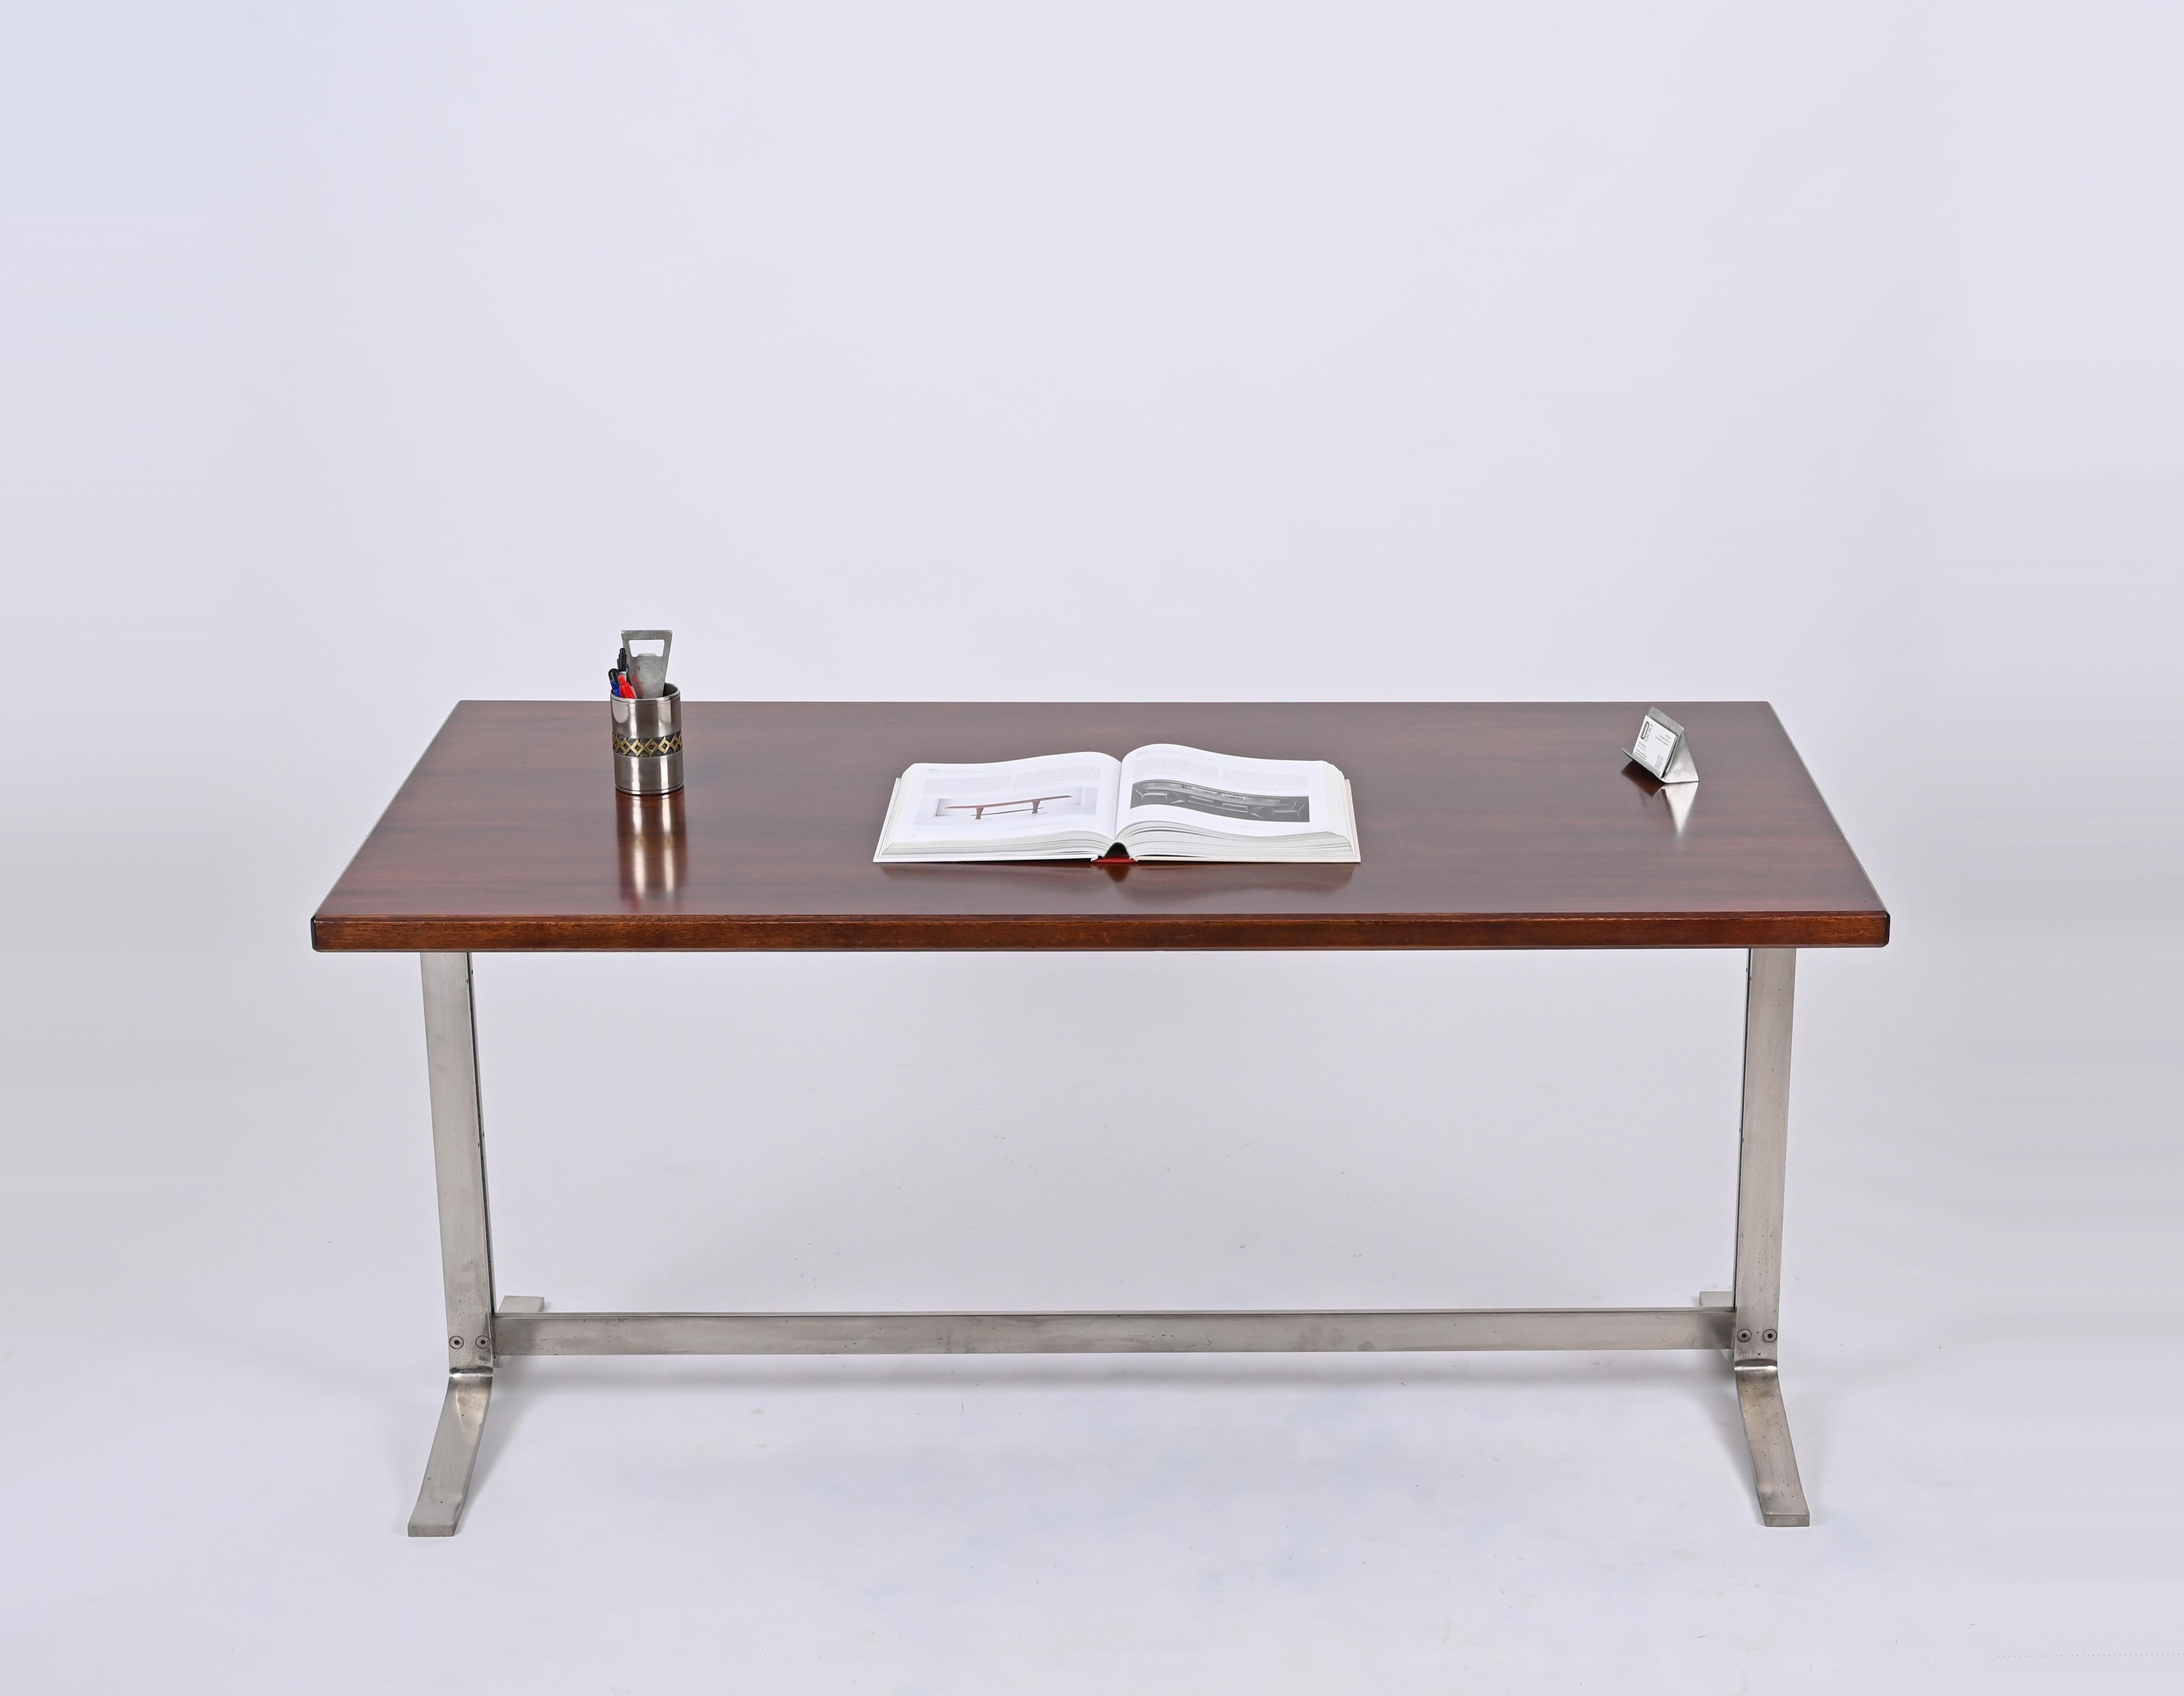 Mid-Century Modern Midcentury Desk in Walnut and Steel by Moscatelli for Formanova, Italy, 1965 For Sale